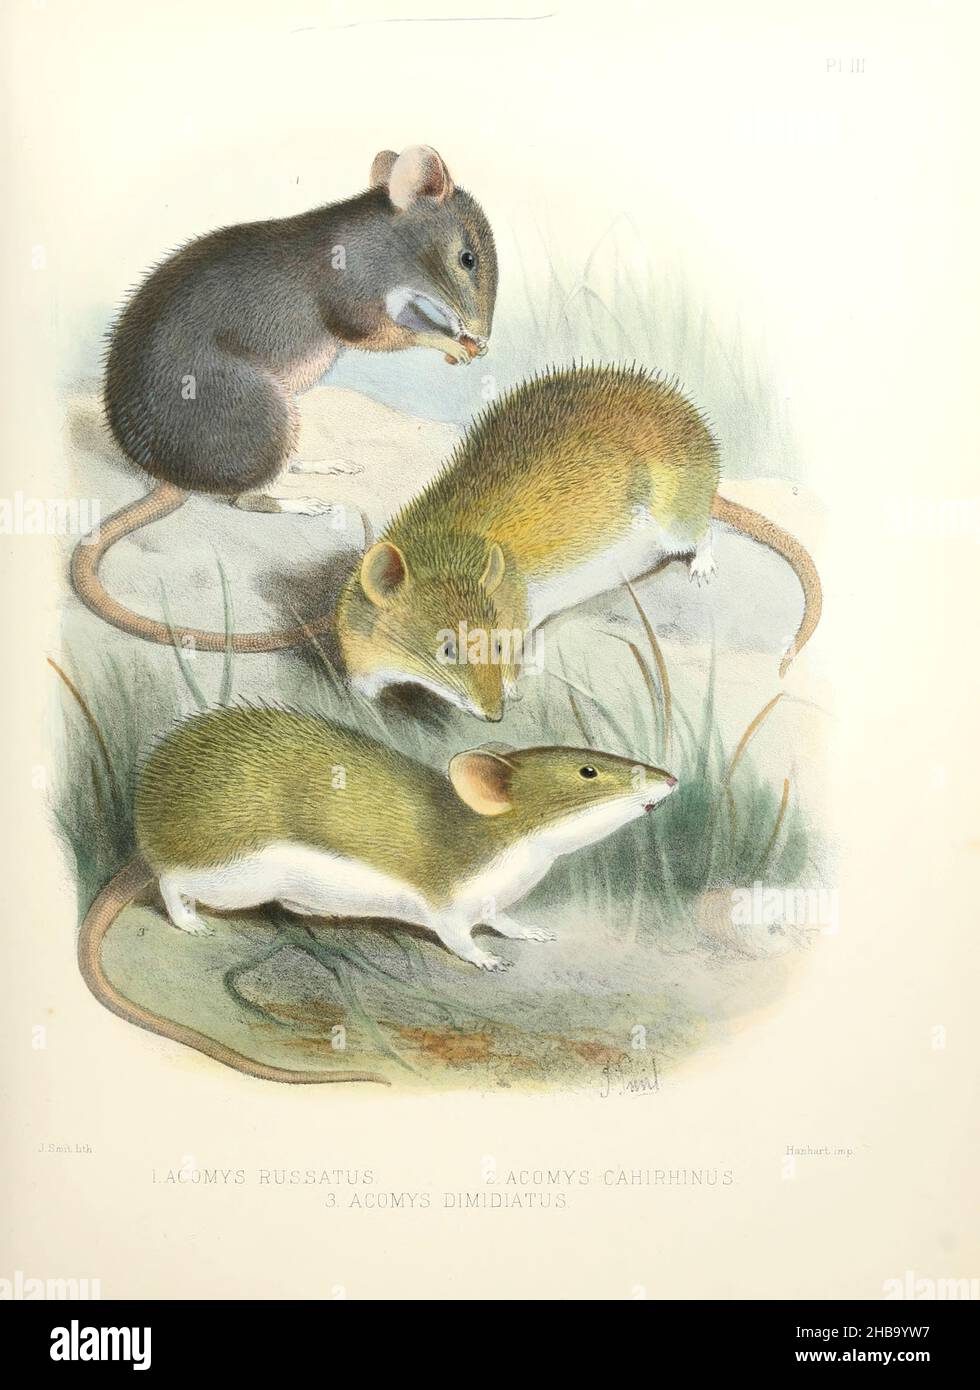 Illustration of several spiny mouse species. At top is a golden spiny mouse (Acomys russatus), at centre is a Cairo spiny mouse (Acomys cahirinus, here as Acomys cahirhinus) and at bottom is an Eastern spiny mouse (Acomys dimidiatus). Illustration from 'The Survey of Western Palestine. The Fauna and Flora of Palestine' by Henry Baker Tristram (1822-1906). Published by The Committee of the Palestine Exploration Fund, London, 1884. Stock Photo